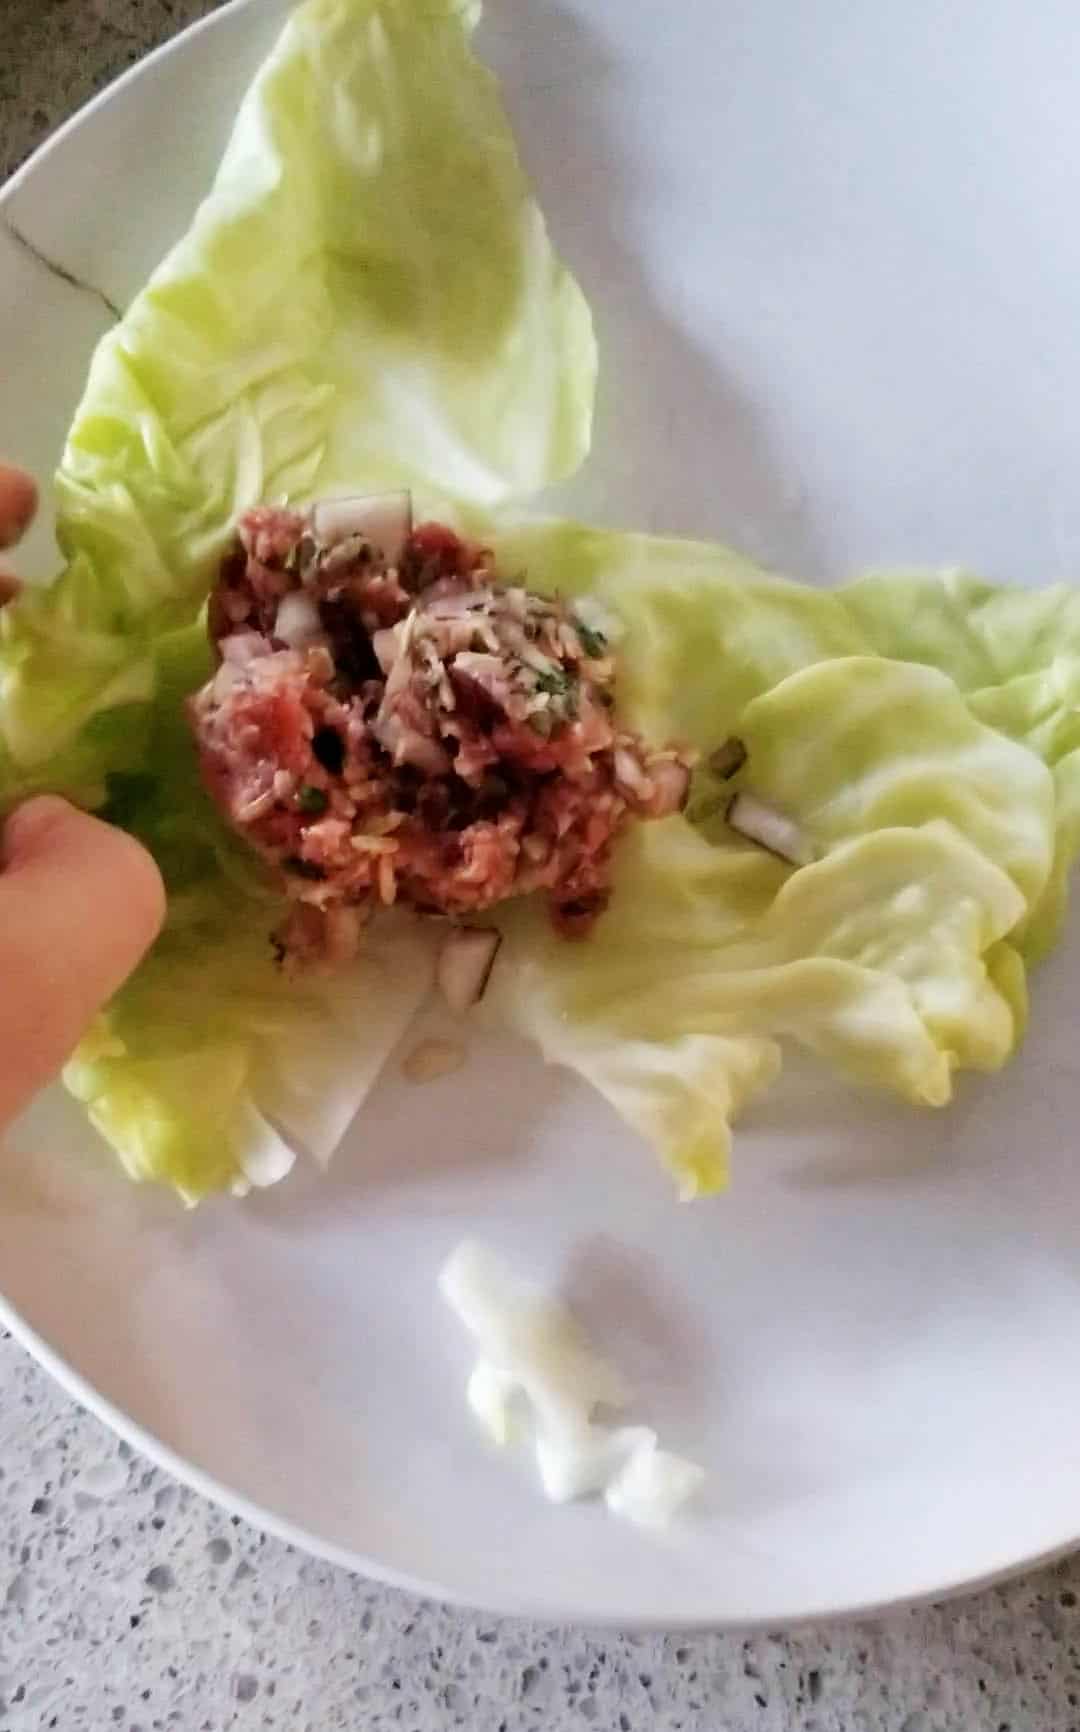 Stuffing the cabbage leaves